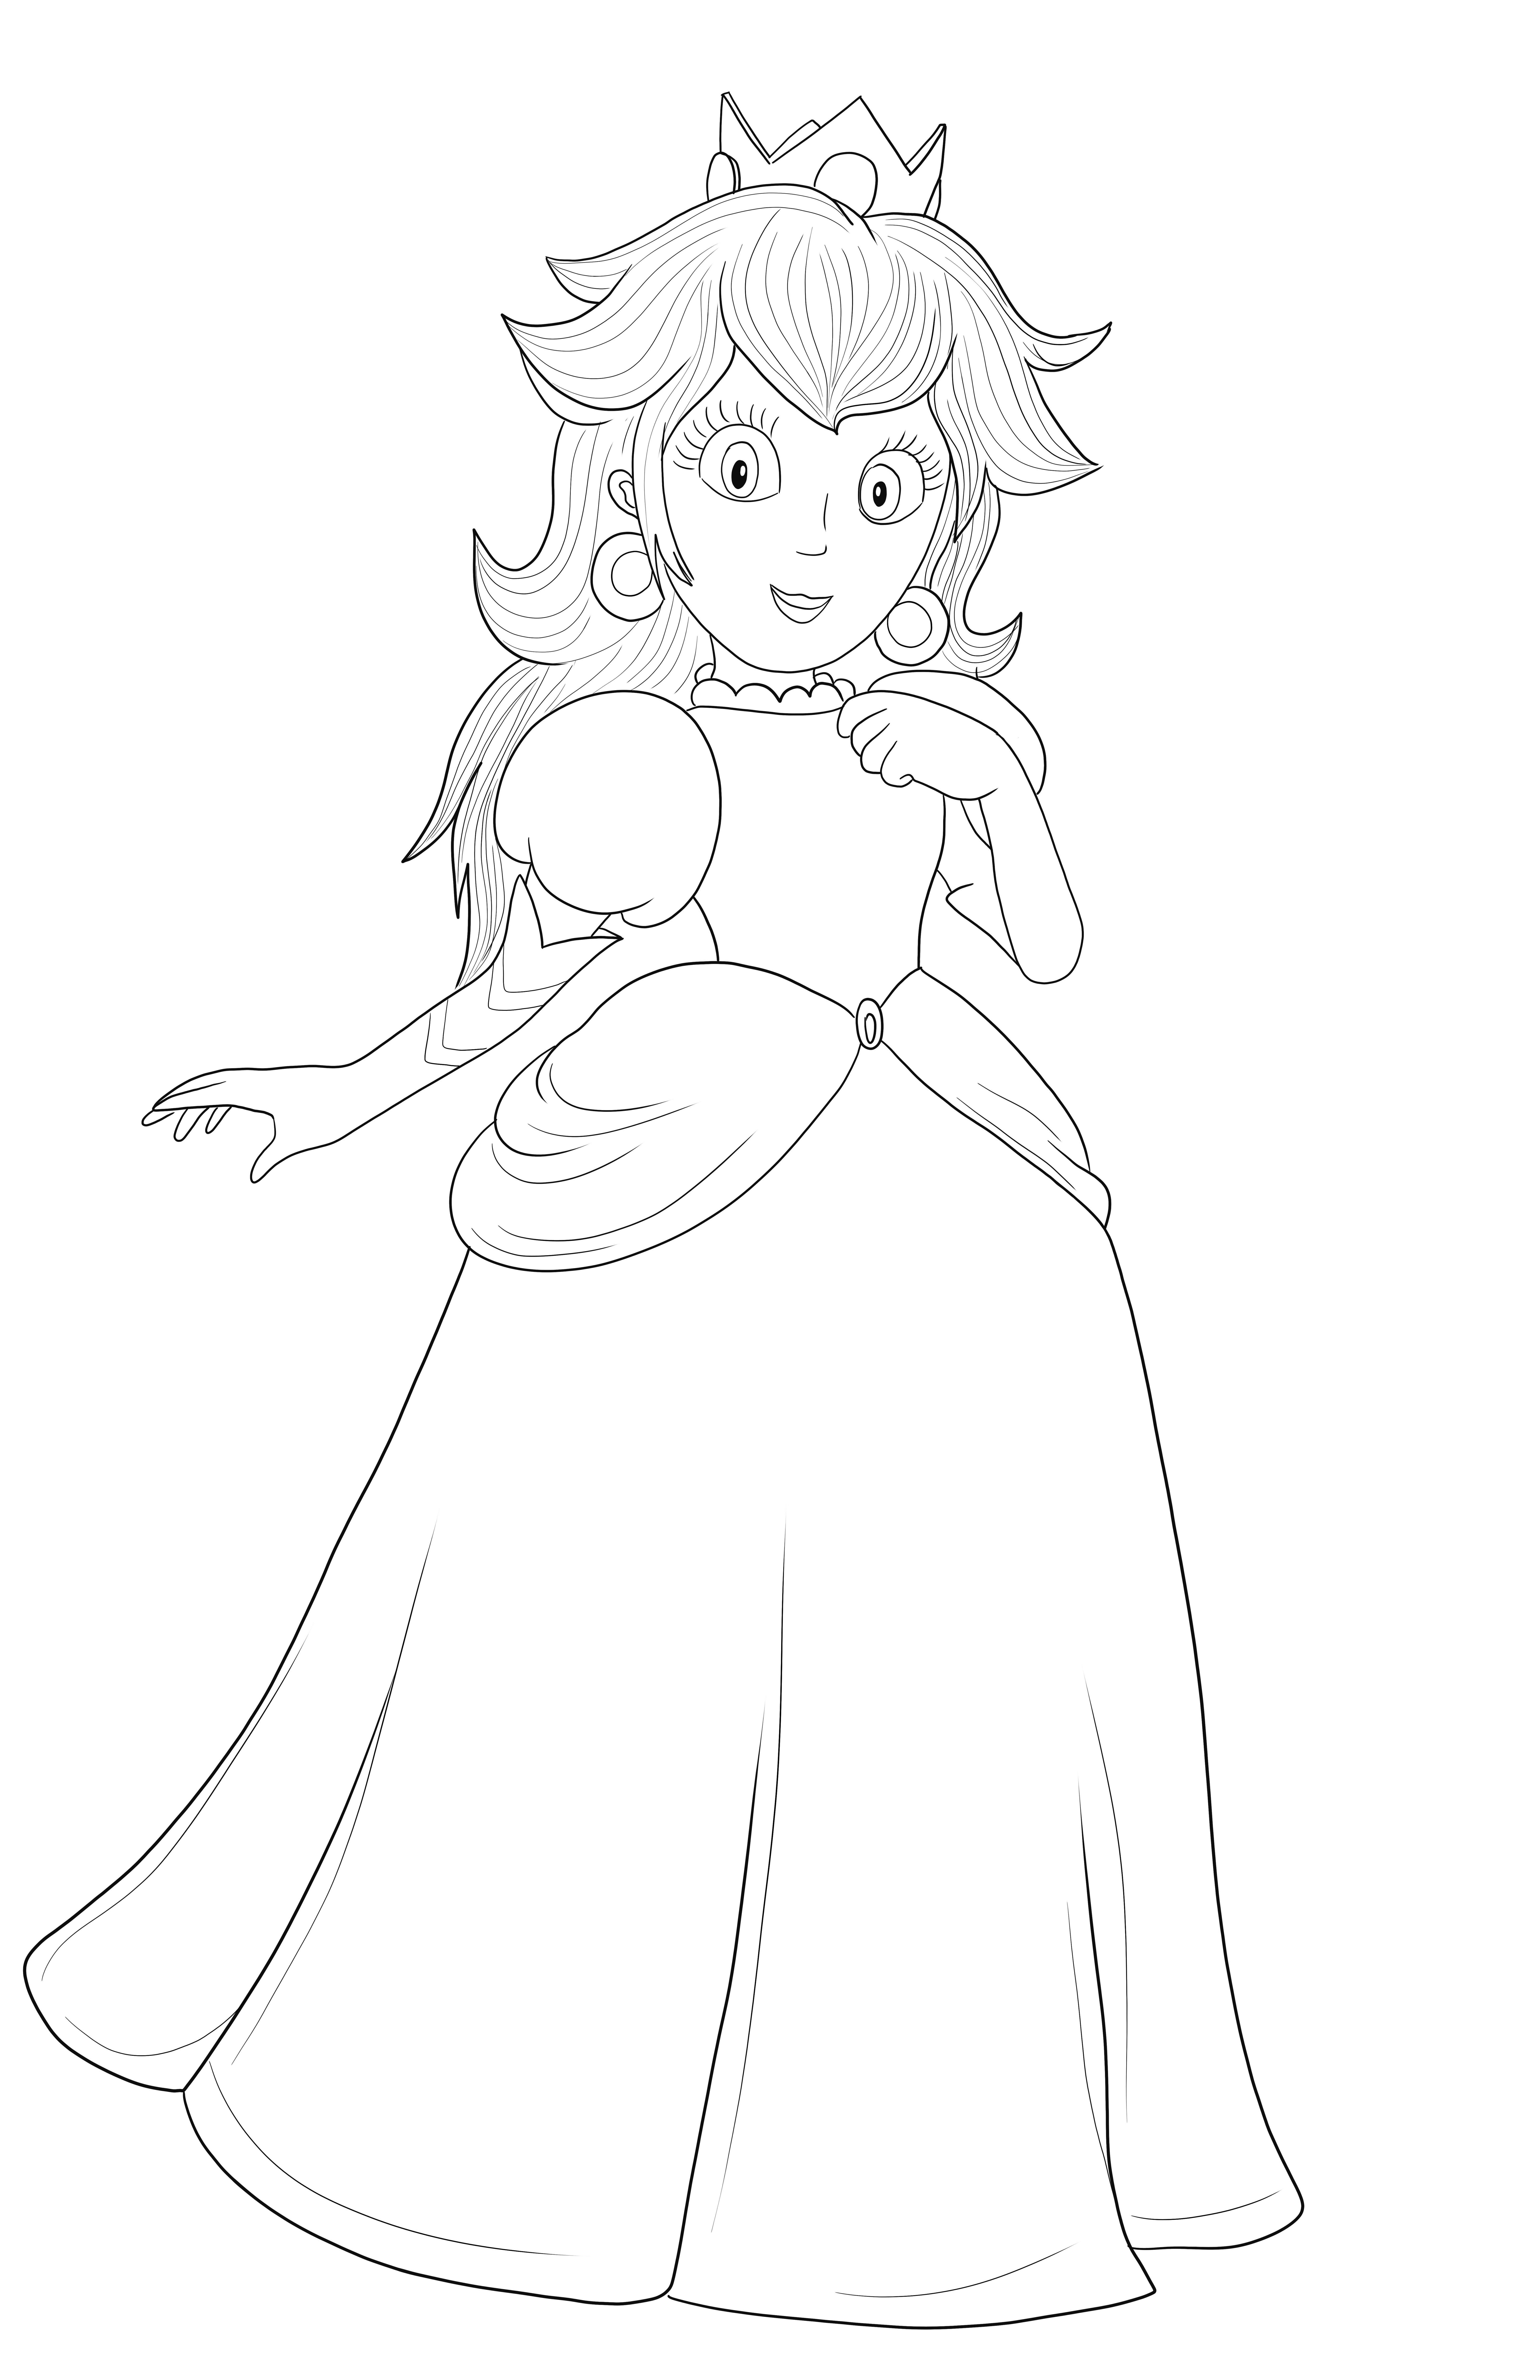 Pretty Princess Peach from Super Mario a simple to color and free to print image